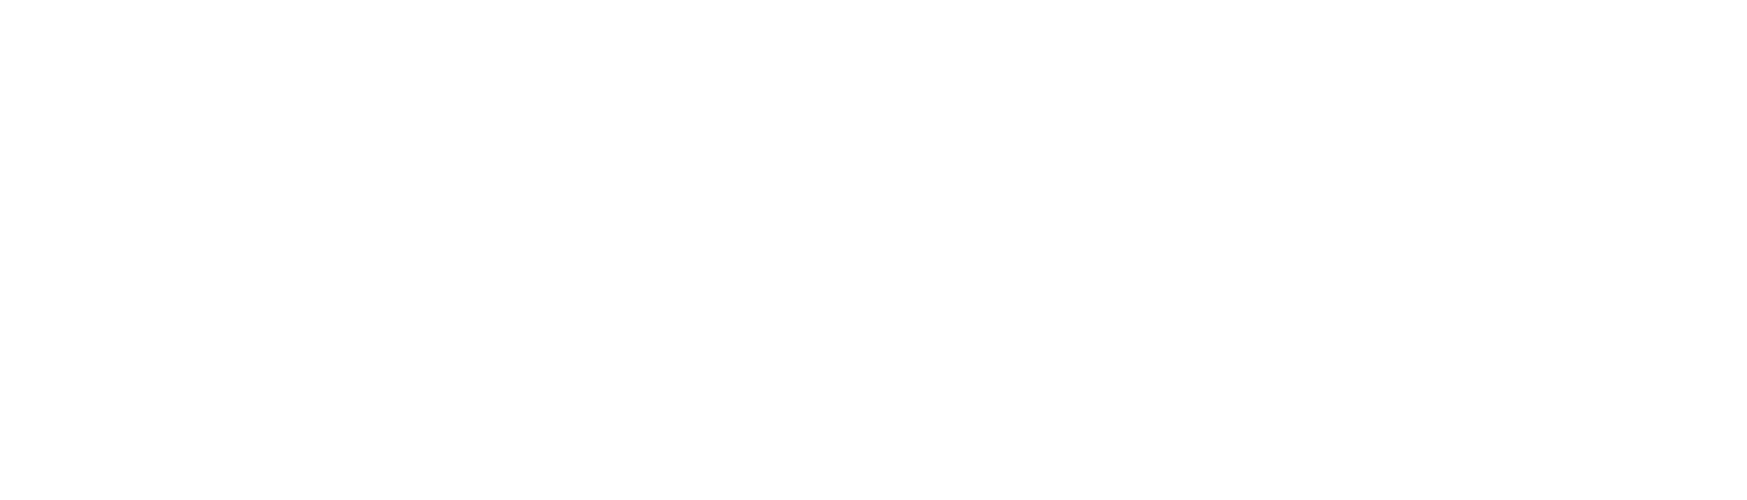 AWS Dev Day Security Edition